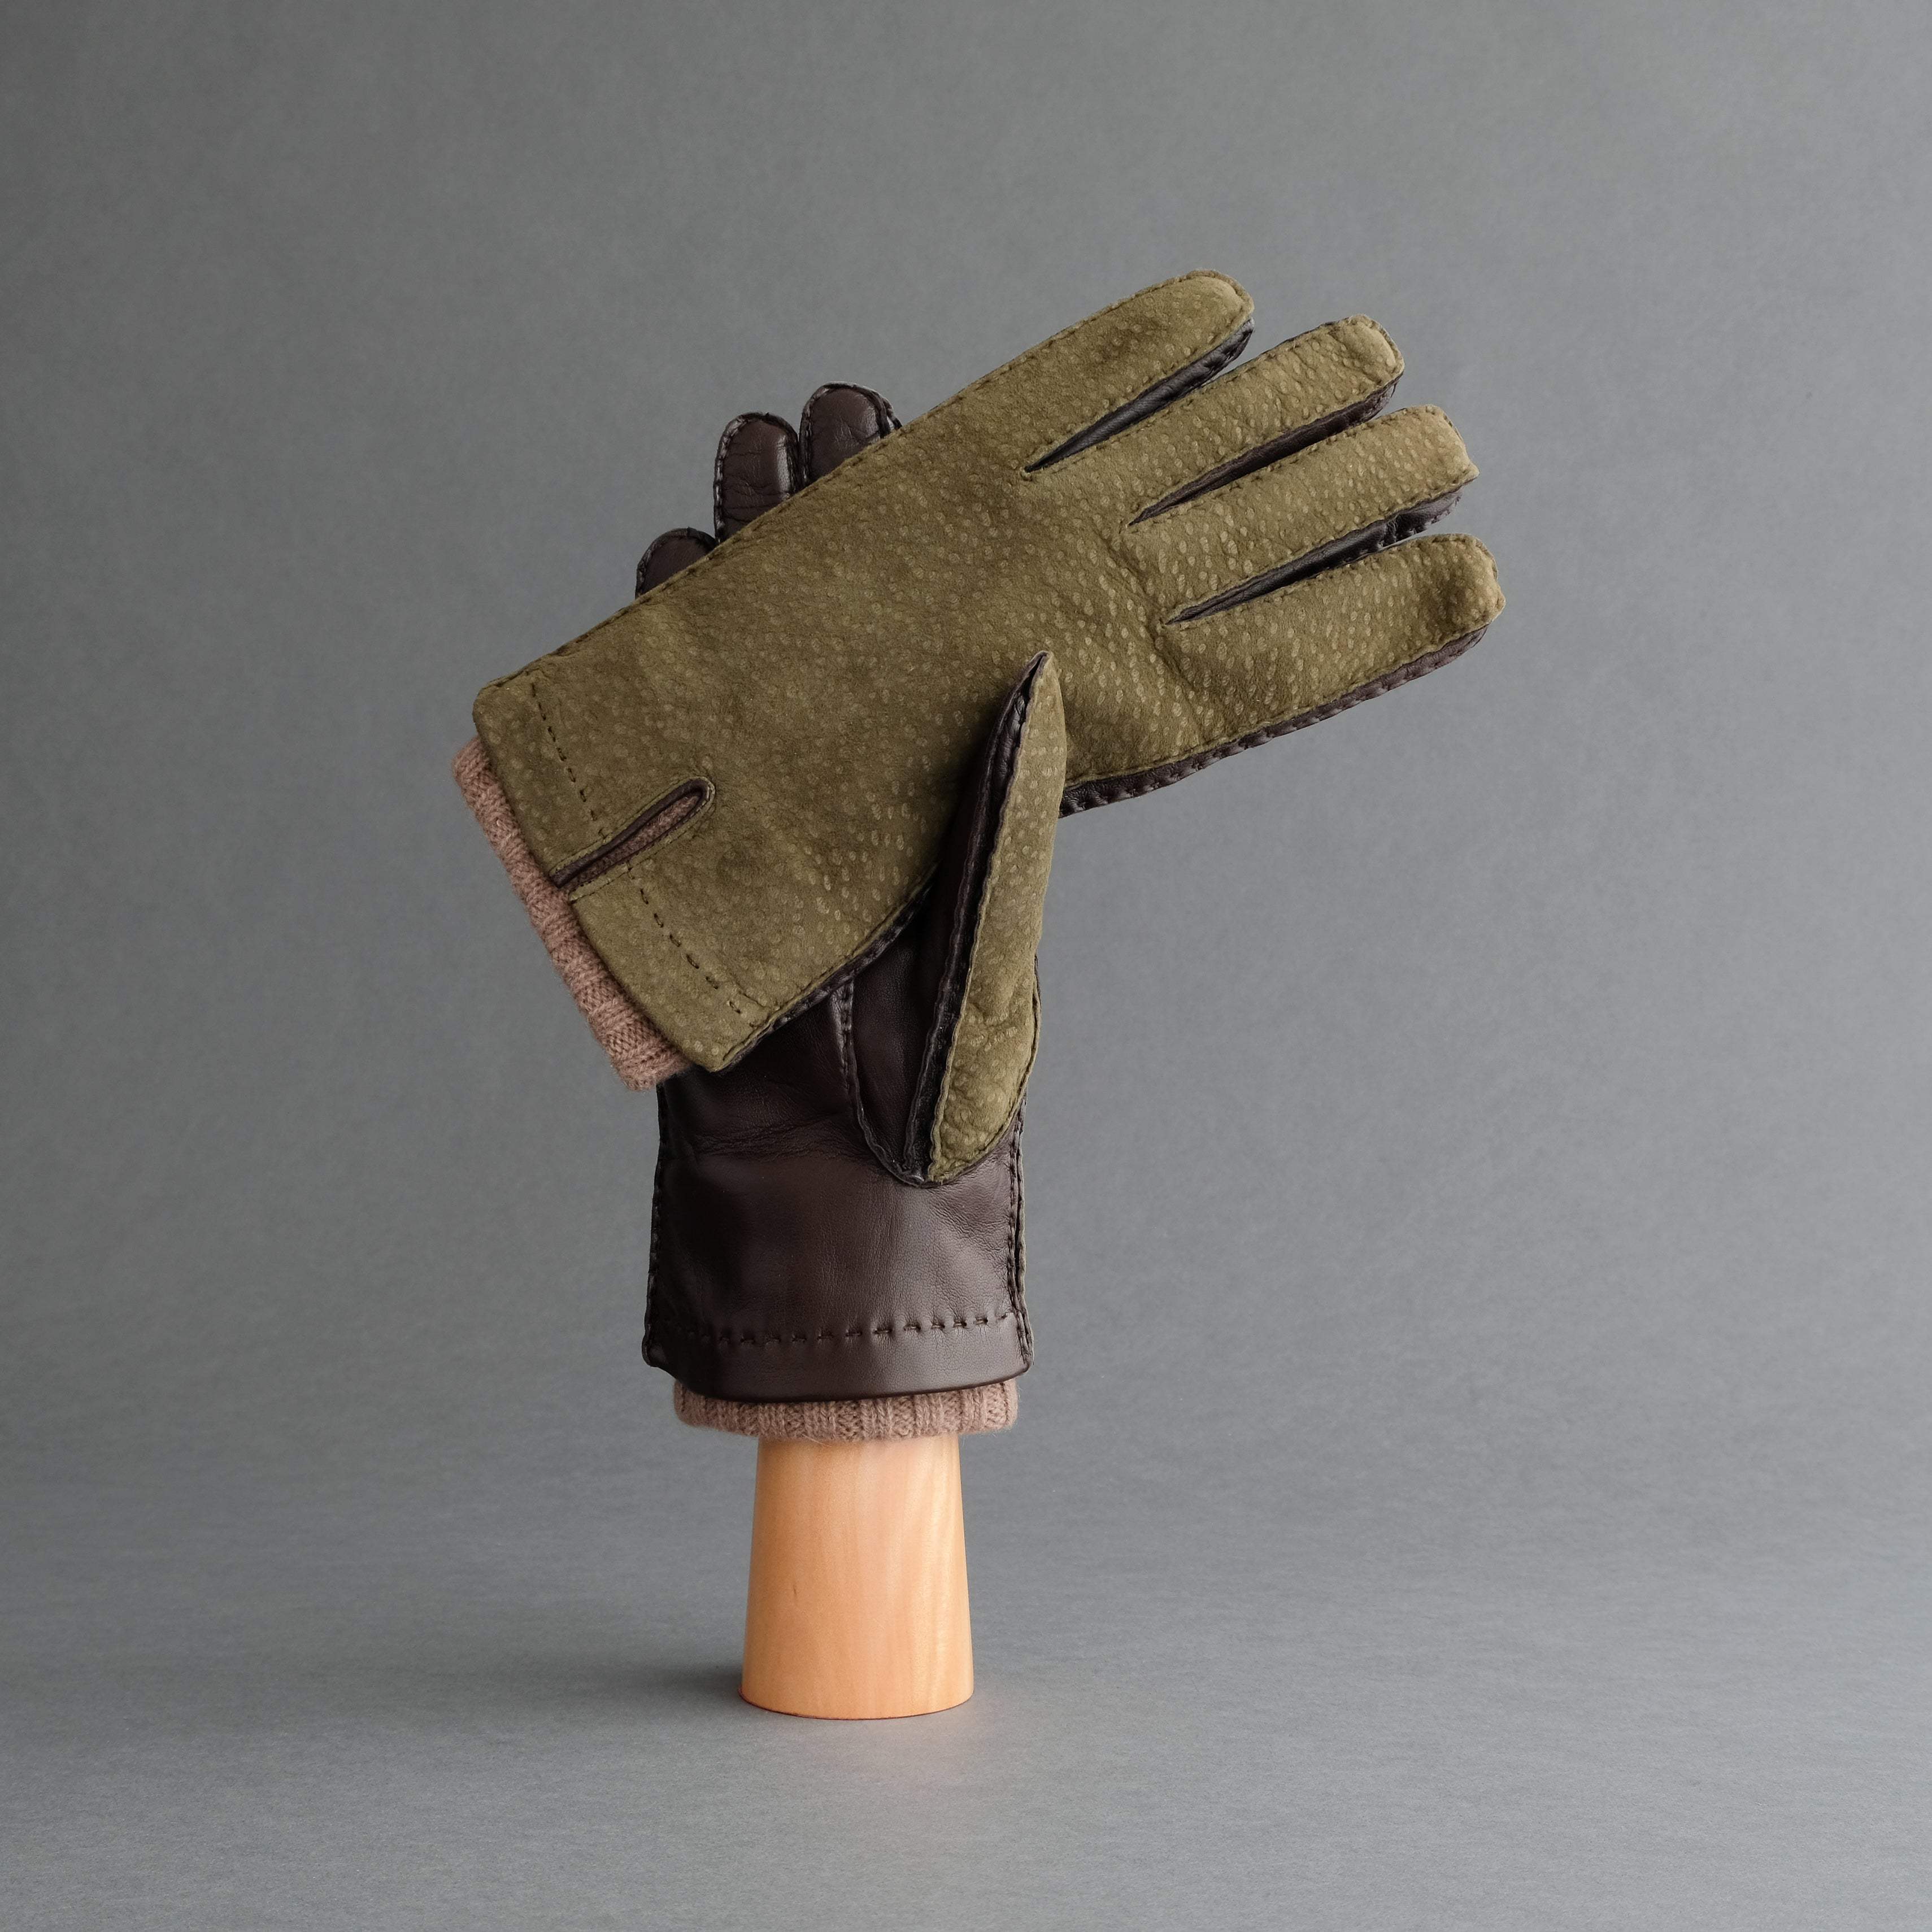 Gentlemen's Gloves from Carpincho and Nappa Leather Lined with Cashmere - TR Handschuhe Wien - Thomas Riemer Handmade Gloves